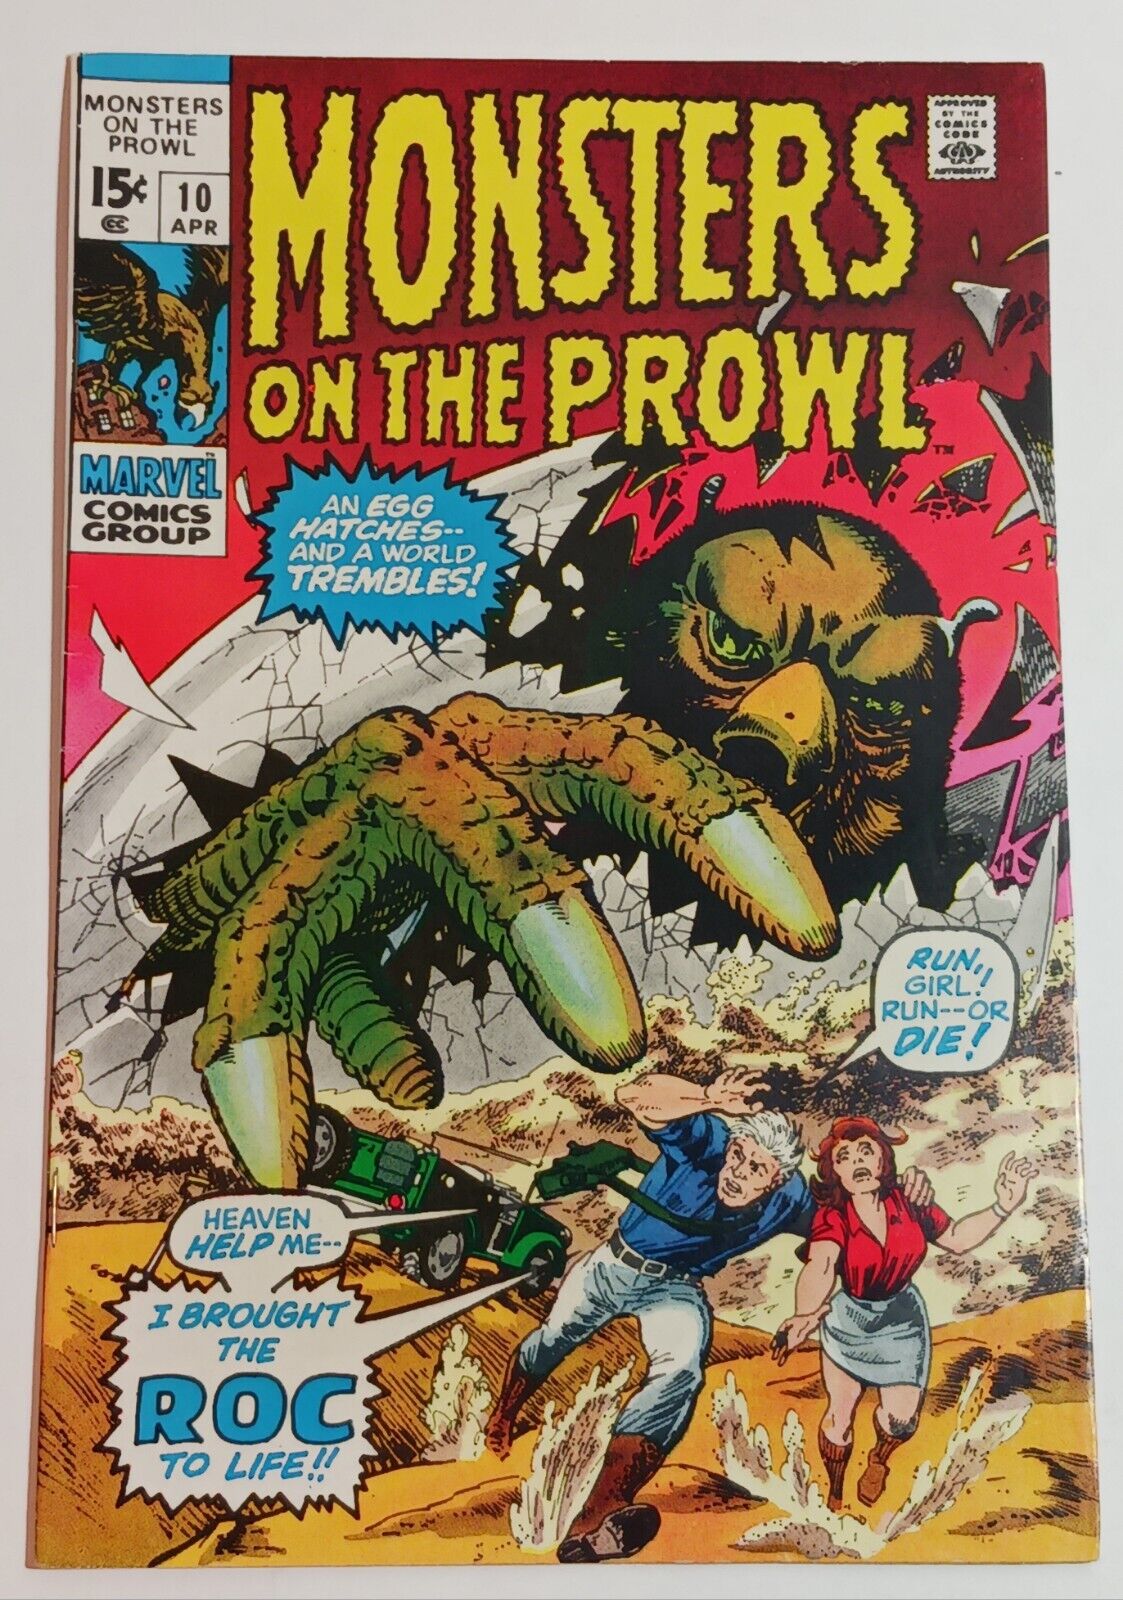 Monsters On The Prowl #10 Marvel April 1971 Steve Ditko Jack Kirby Dick Ayers